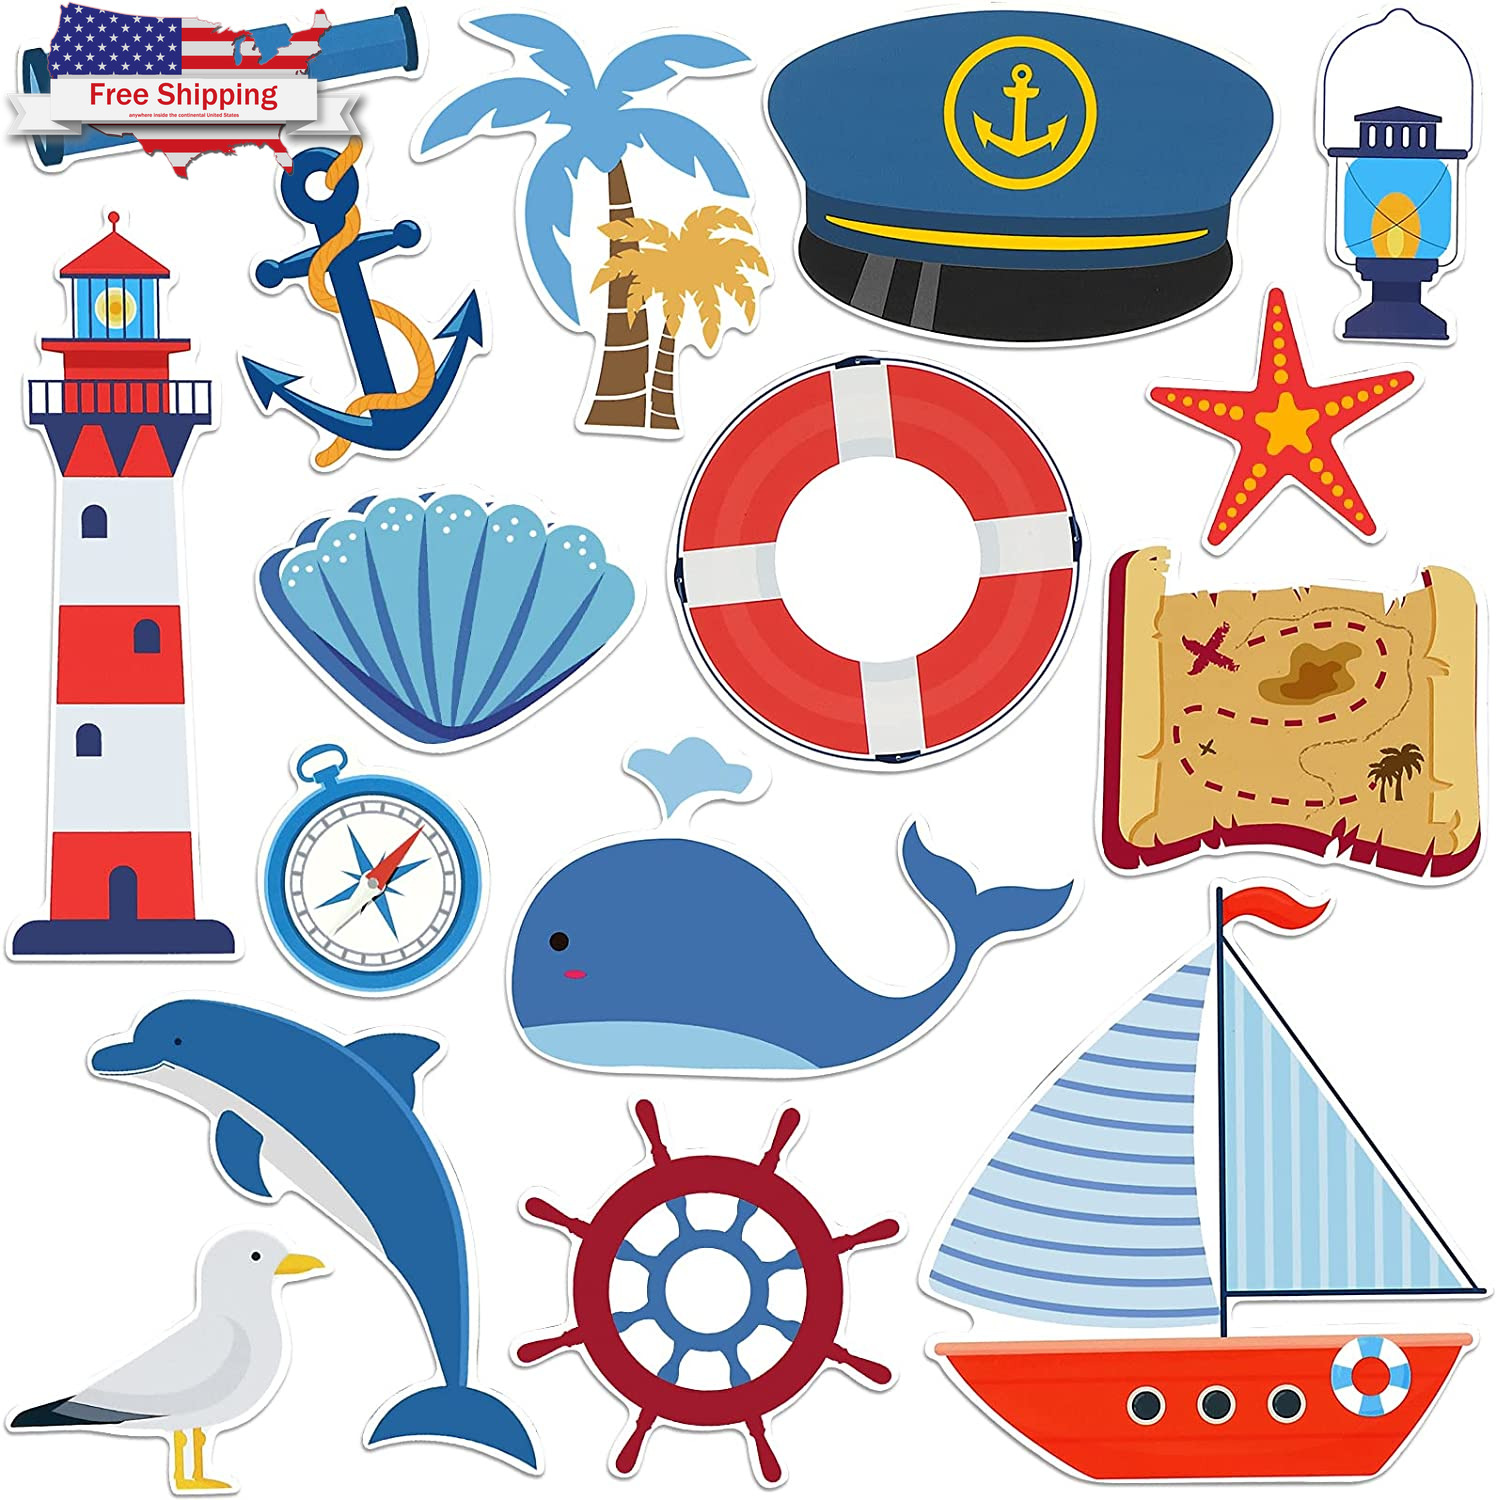 16 Pcs Sea Navigation Car Magnets Cruise Door Magnet Stickers Anchor Shell Crui 